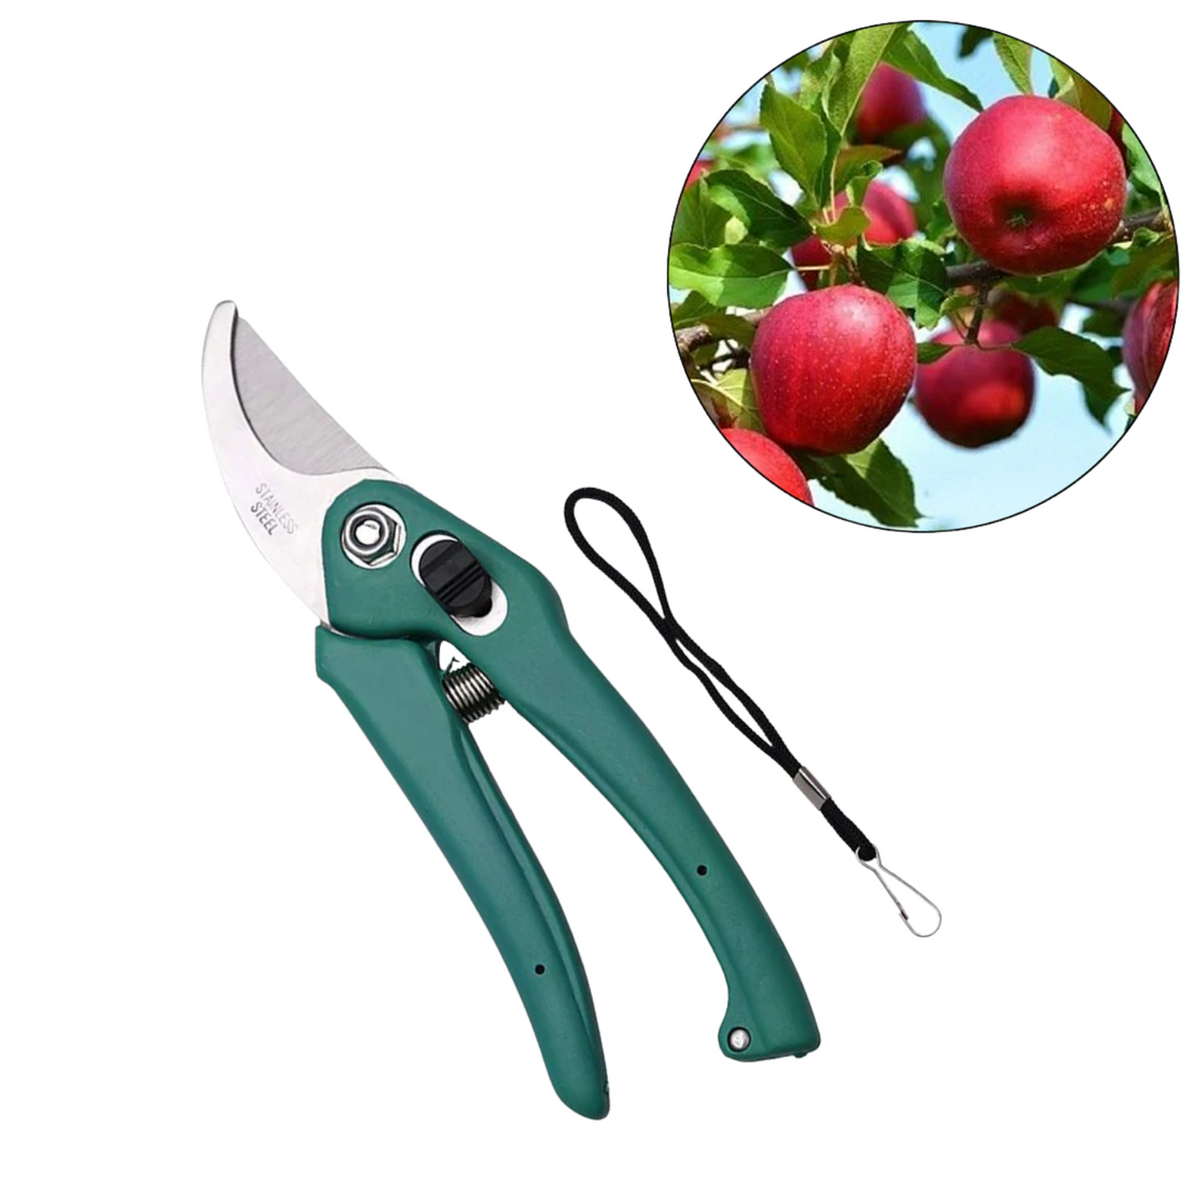 GARDEN SHEARS PRUNERS SCISSOR FOR CUTTING BRANCHES, FLOWERS, LEAVES, PRUNING SEEDS